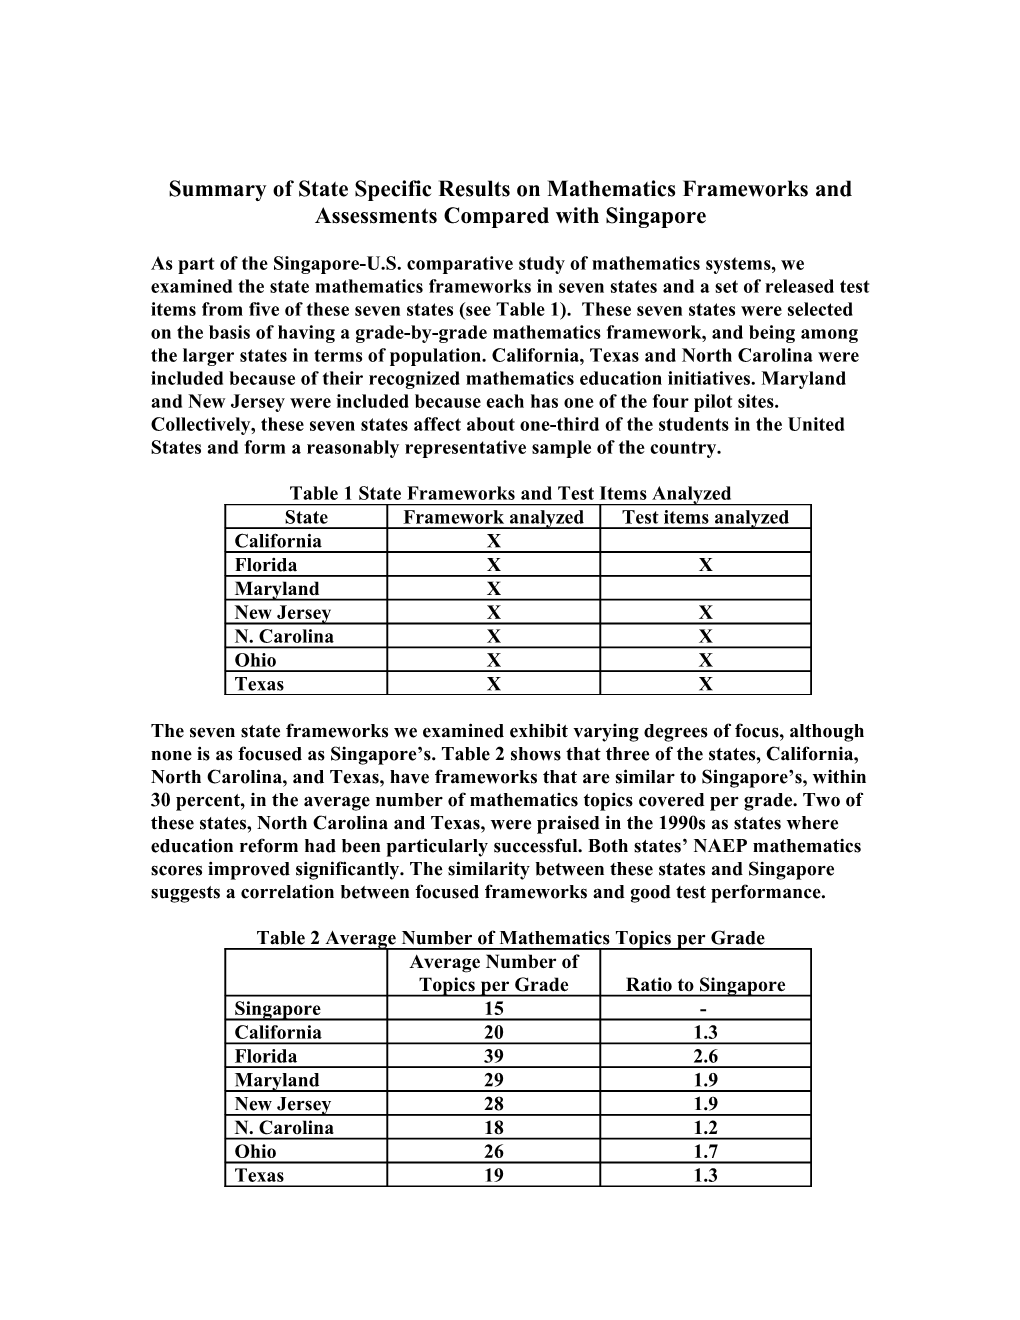 Summary of State Specific Results on Mathematics Frameworks and Assessments Compared With